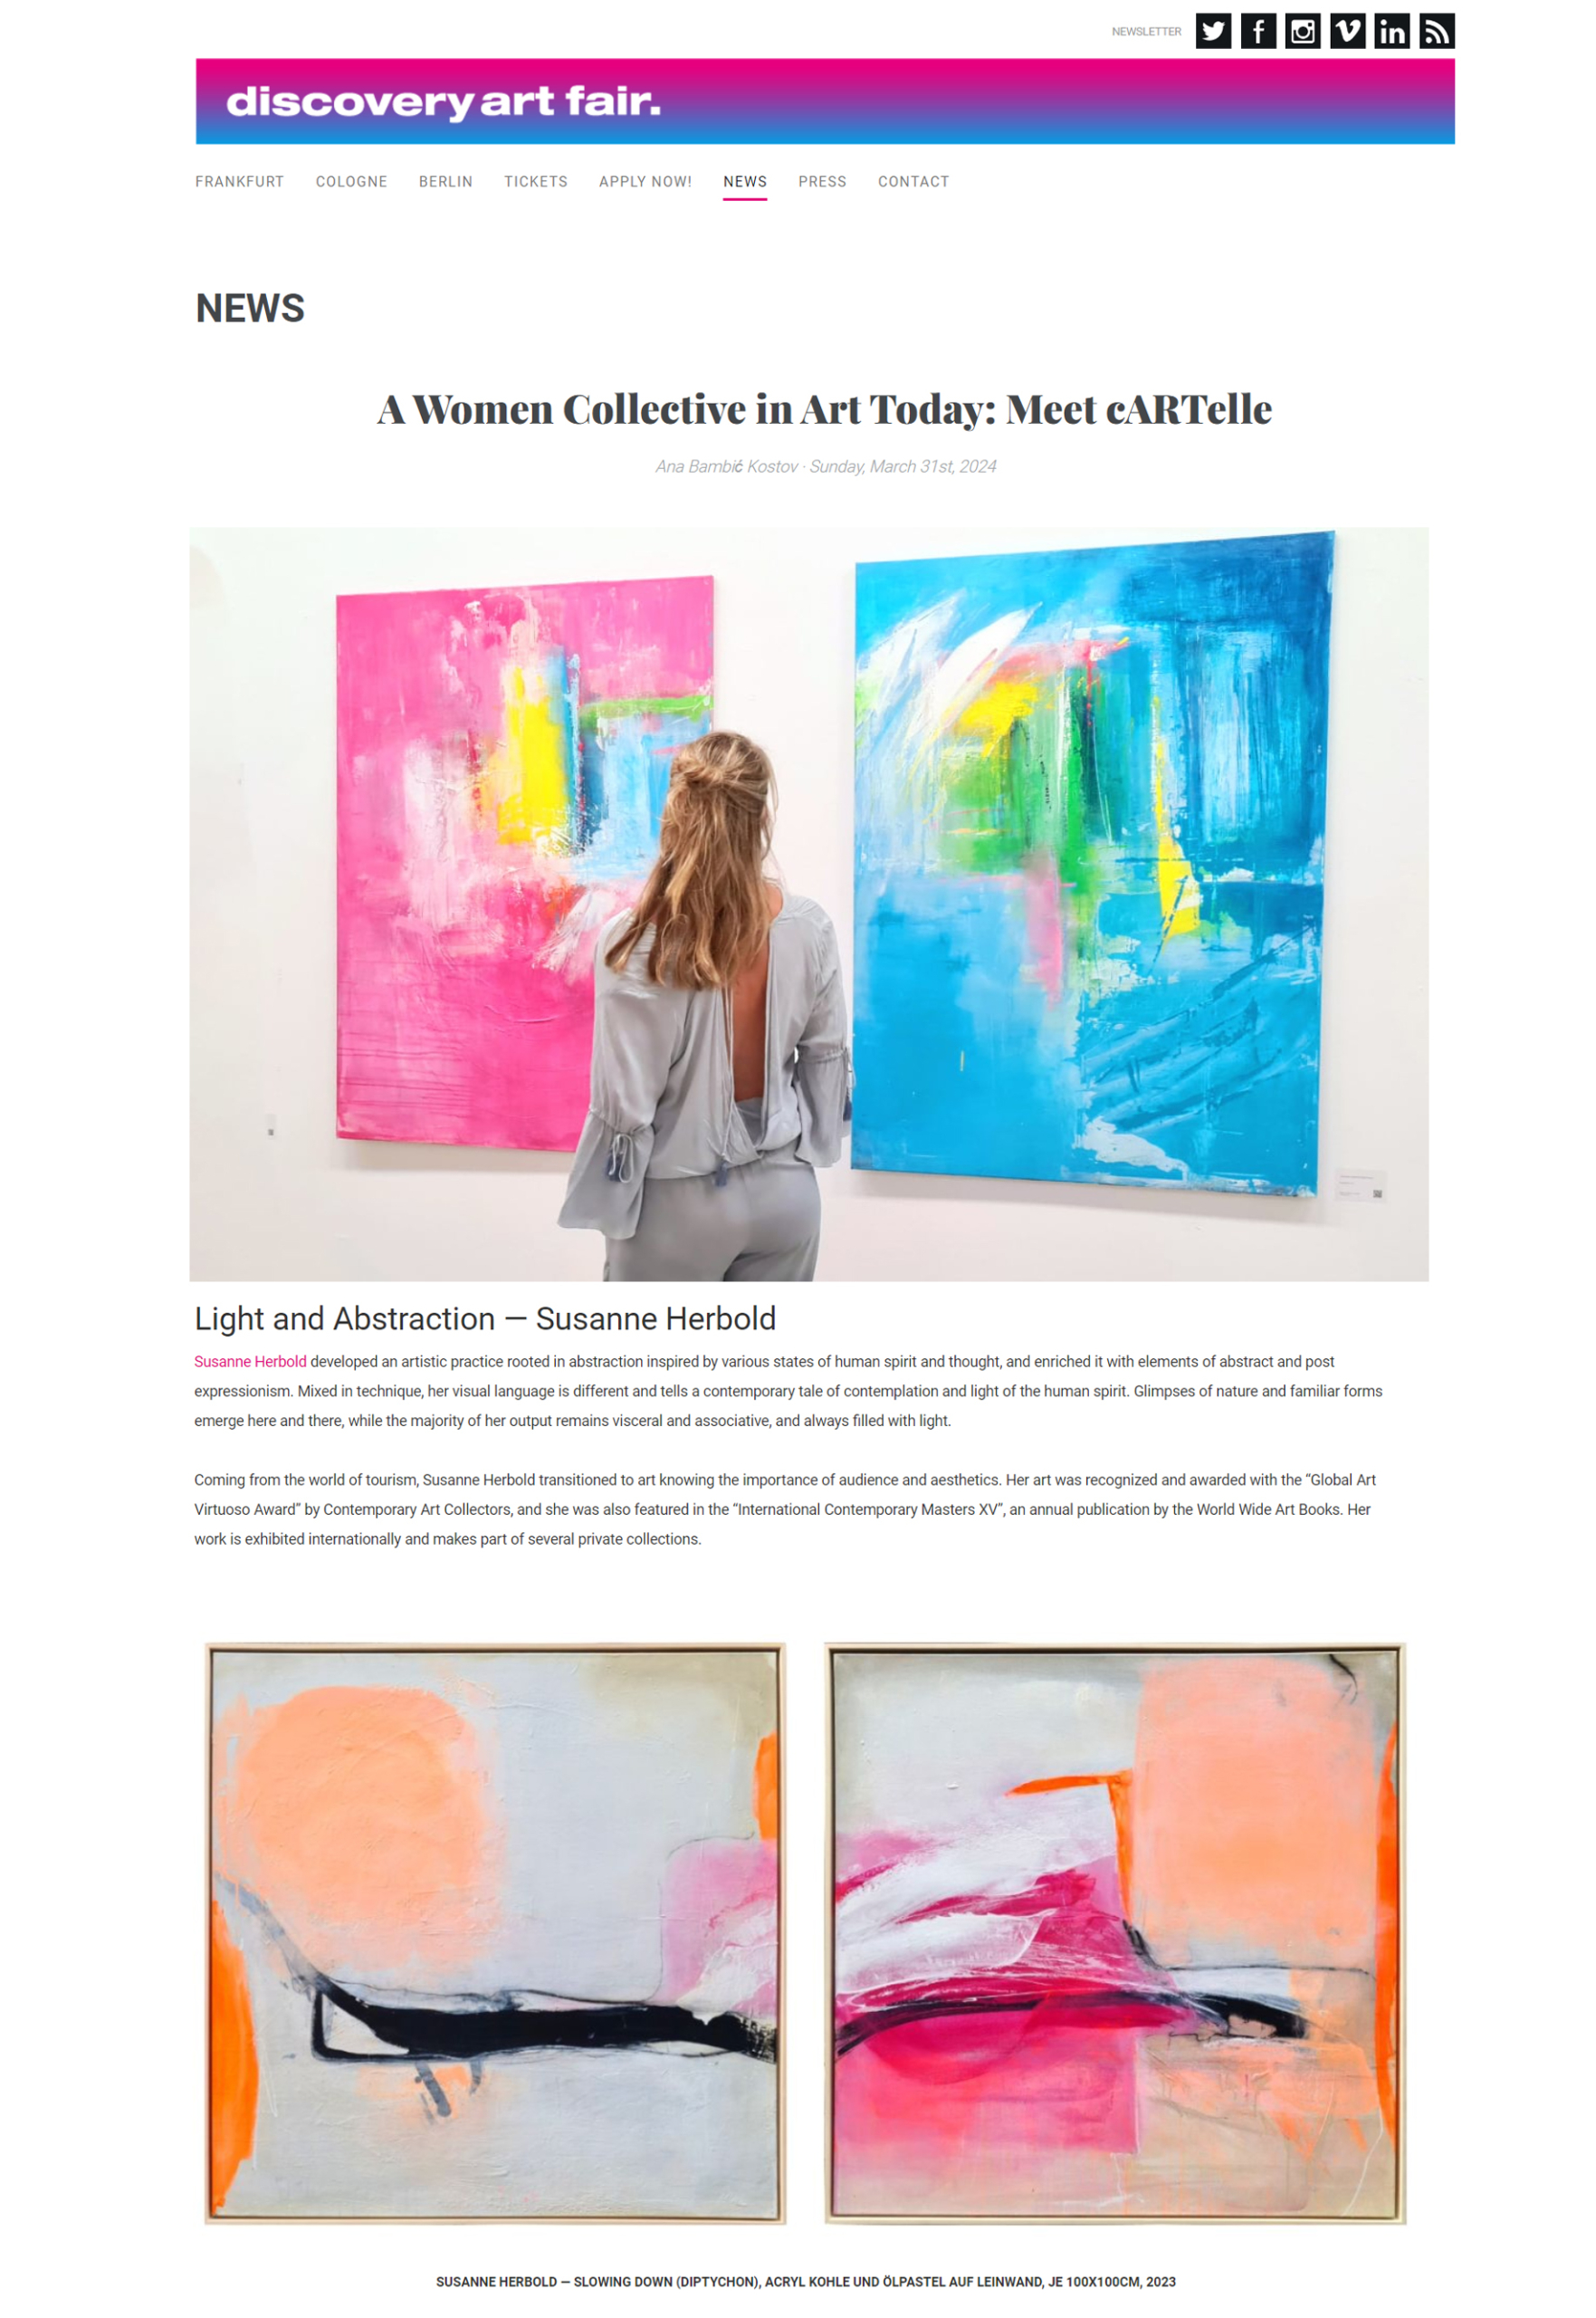 Artikel "A Women´s Collective in Art Today: Meet cARTelle" by Ana Bambić Kostov